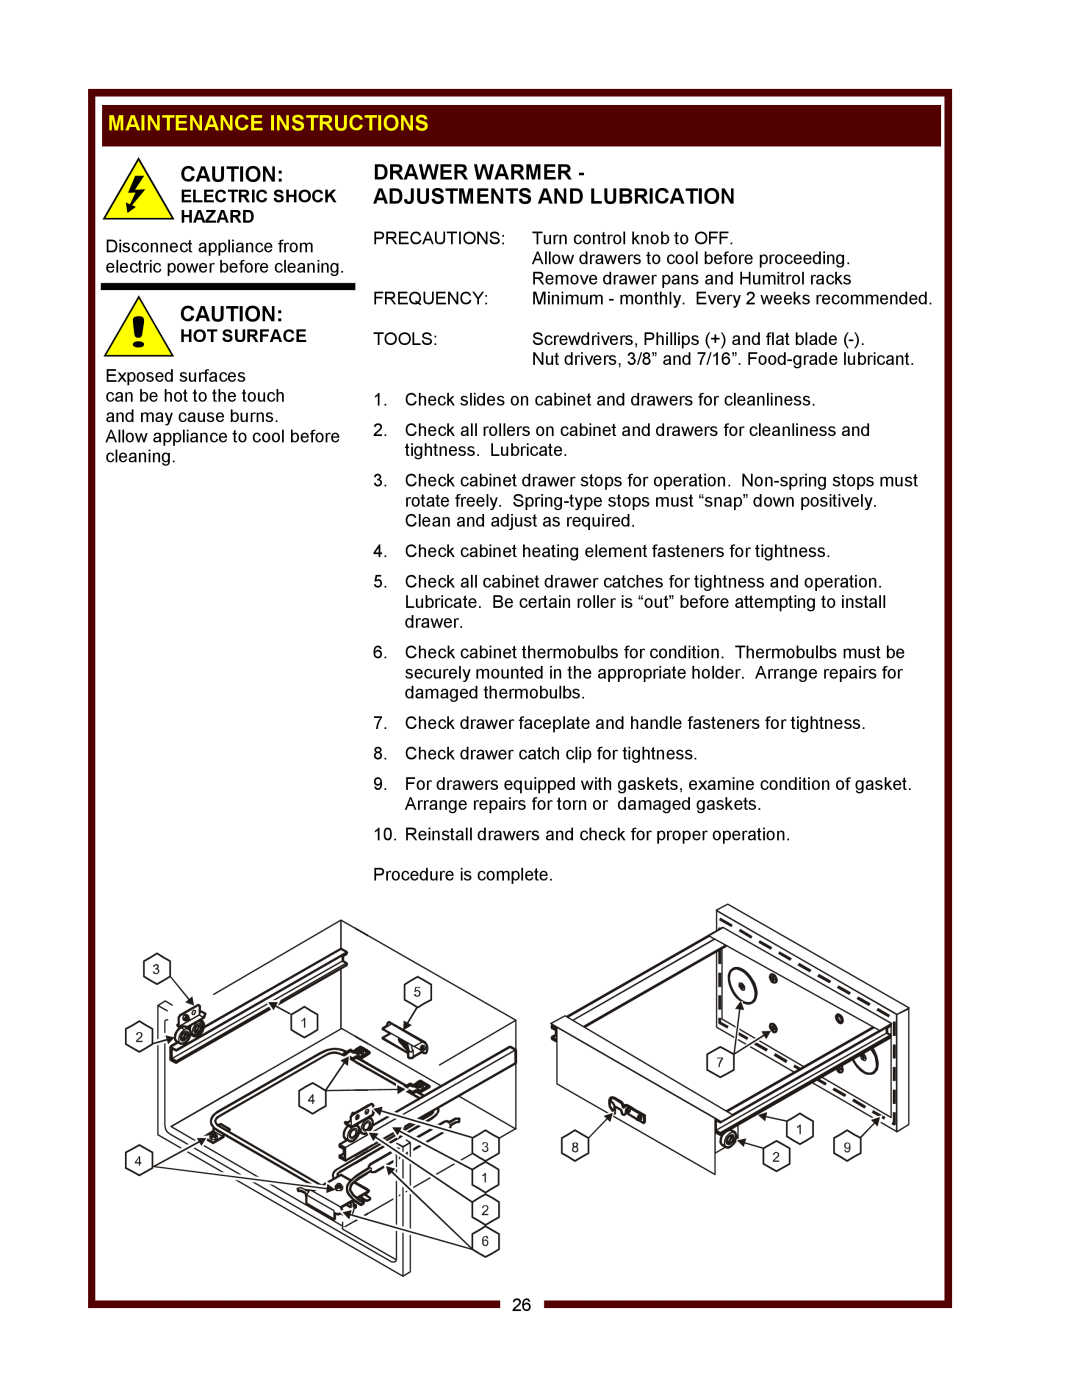 Wells WV-FGRW Drawer Warmer Adjustments And Lubrication, Maintenance Instructions, Electric Shock Hazard, Hot Surface 